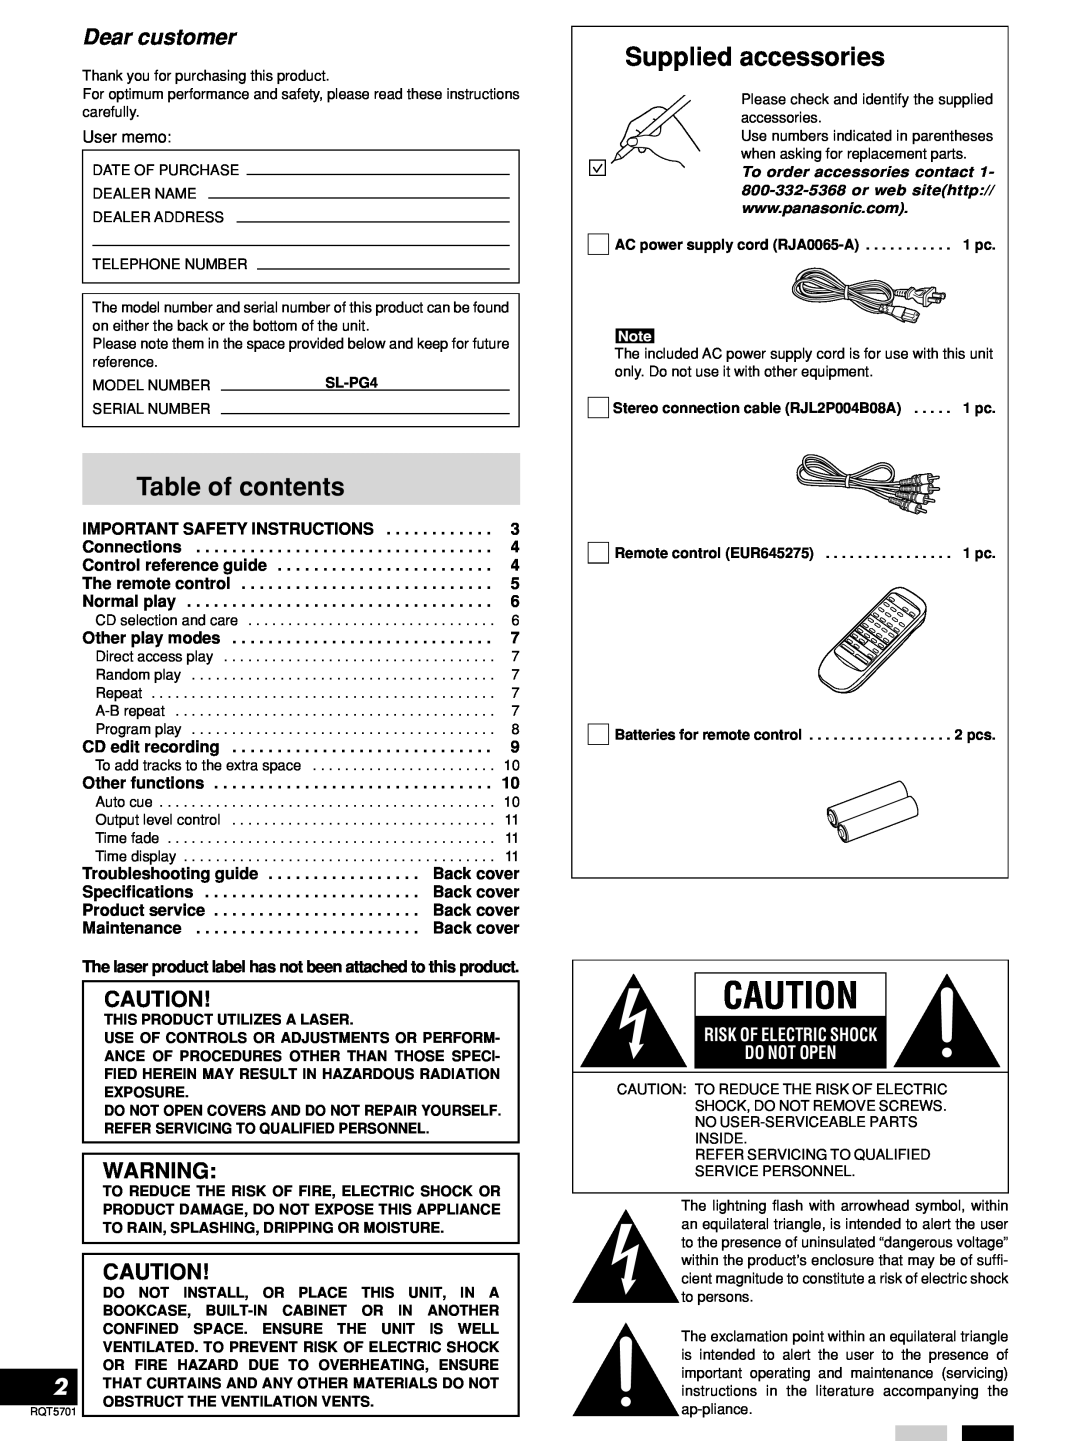 Panasonic SL-PG4 manual Table of contents, Supplied accessories, Dear customer, Risk Of Electric Shock Do Not Open 